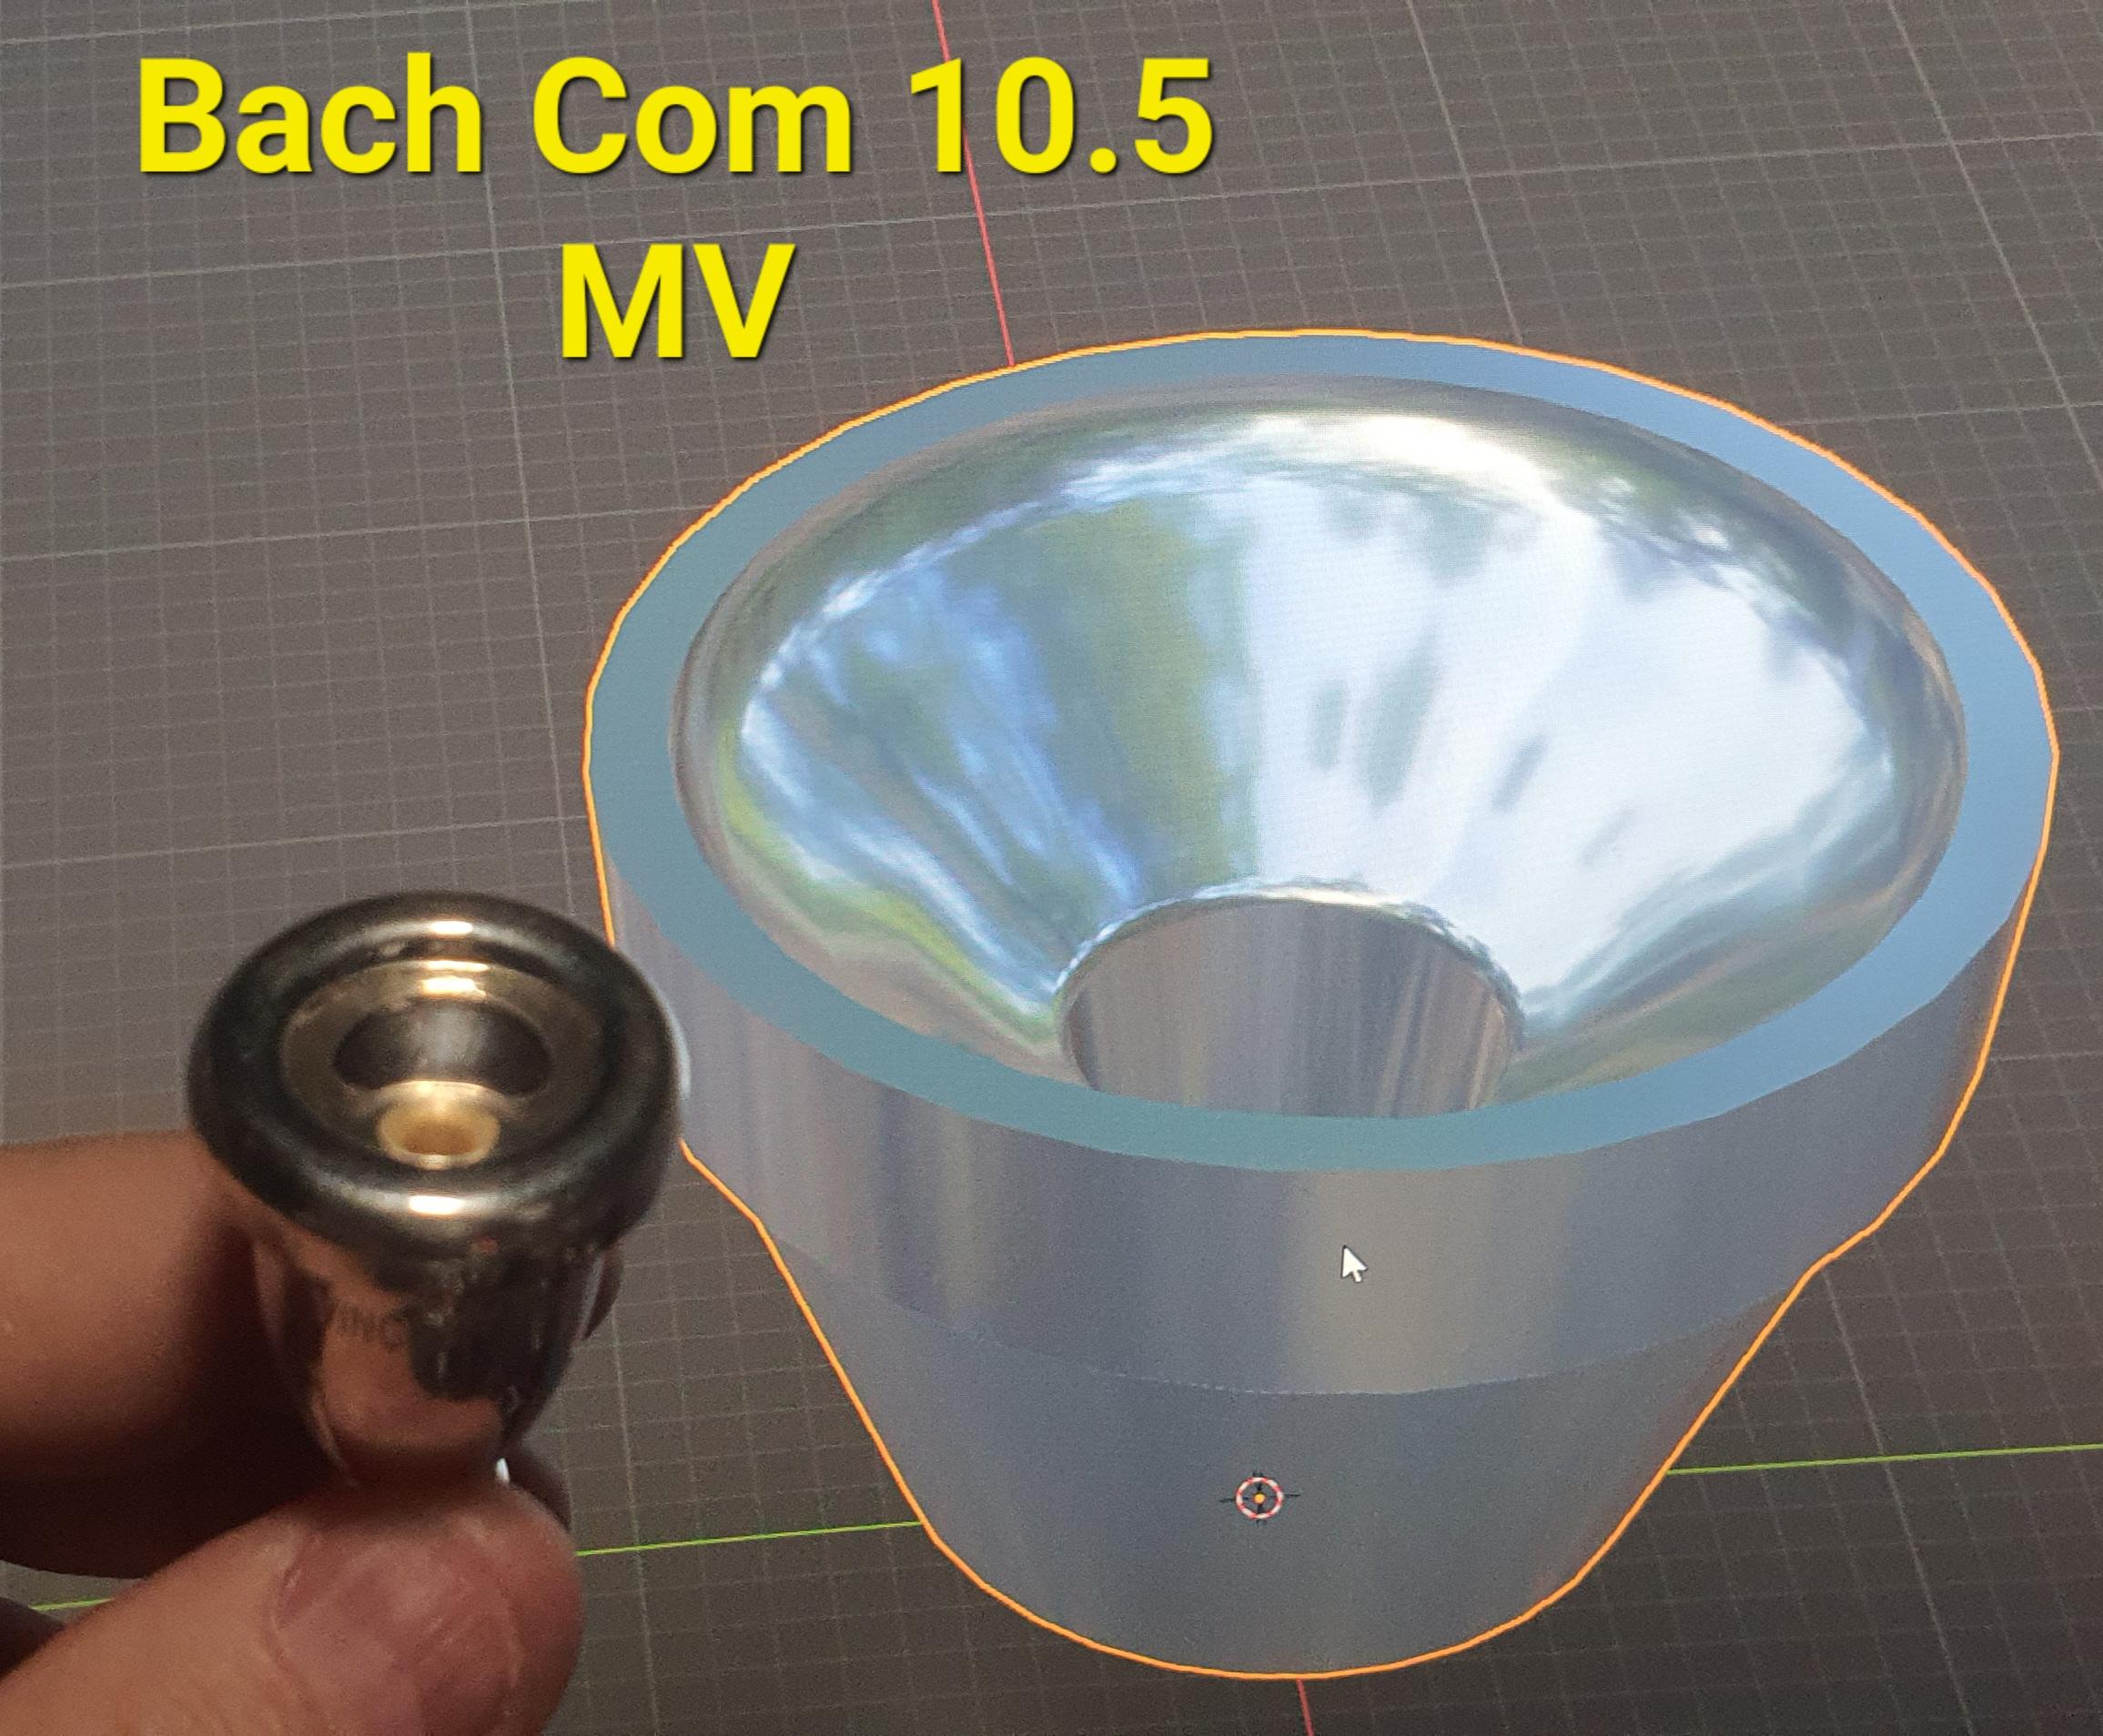 Trumpet MP Adaptor for Multipiece Mouthpiece - Version 2 with V Cup design similar to Bach Com 10.5 MV that I have. - 3d model